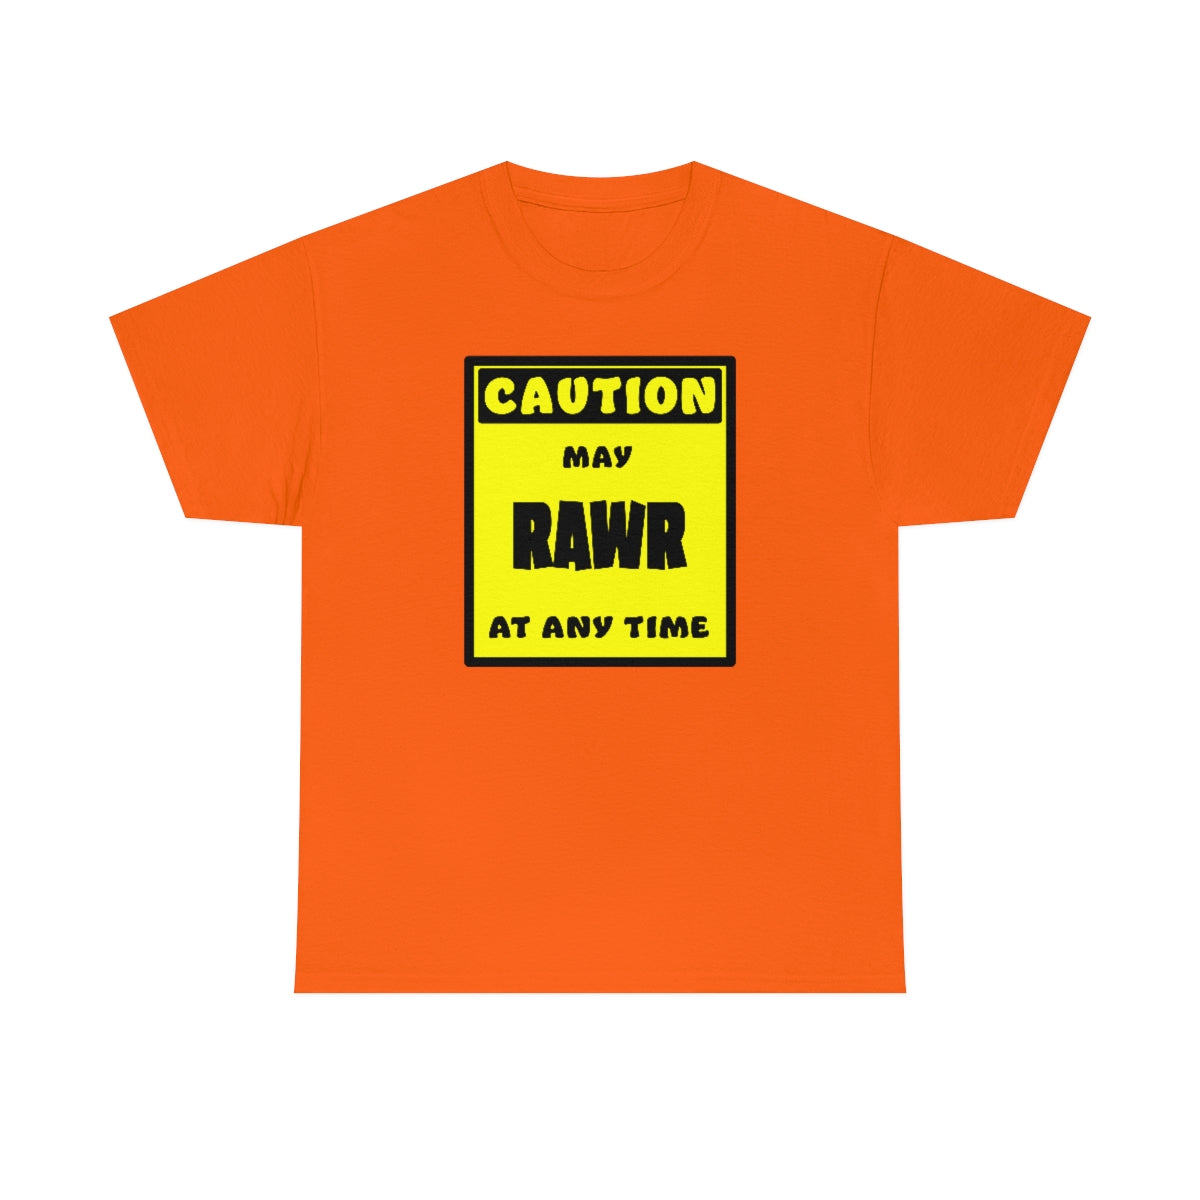 CAUTION! May RAWR at any time! - T-Shirt T-Shirt Artworktee Orange S 